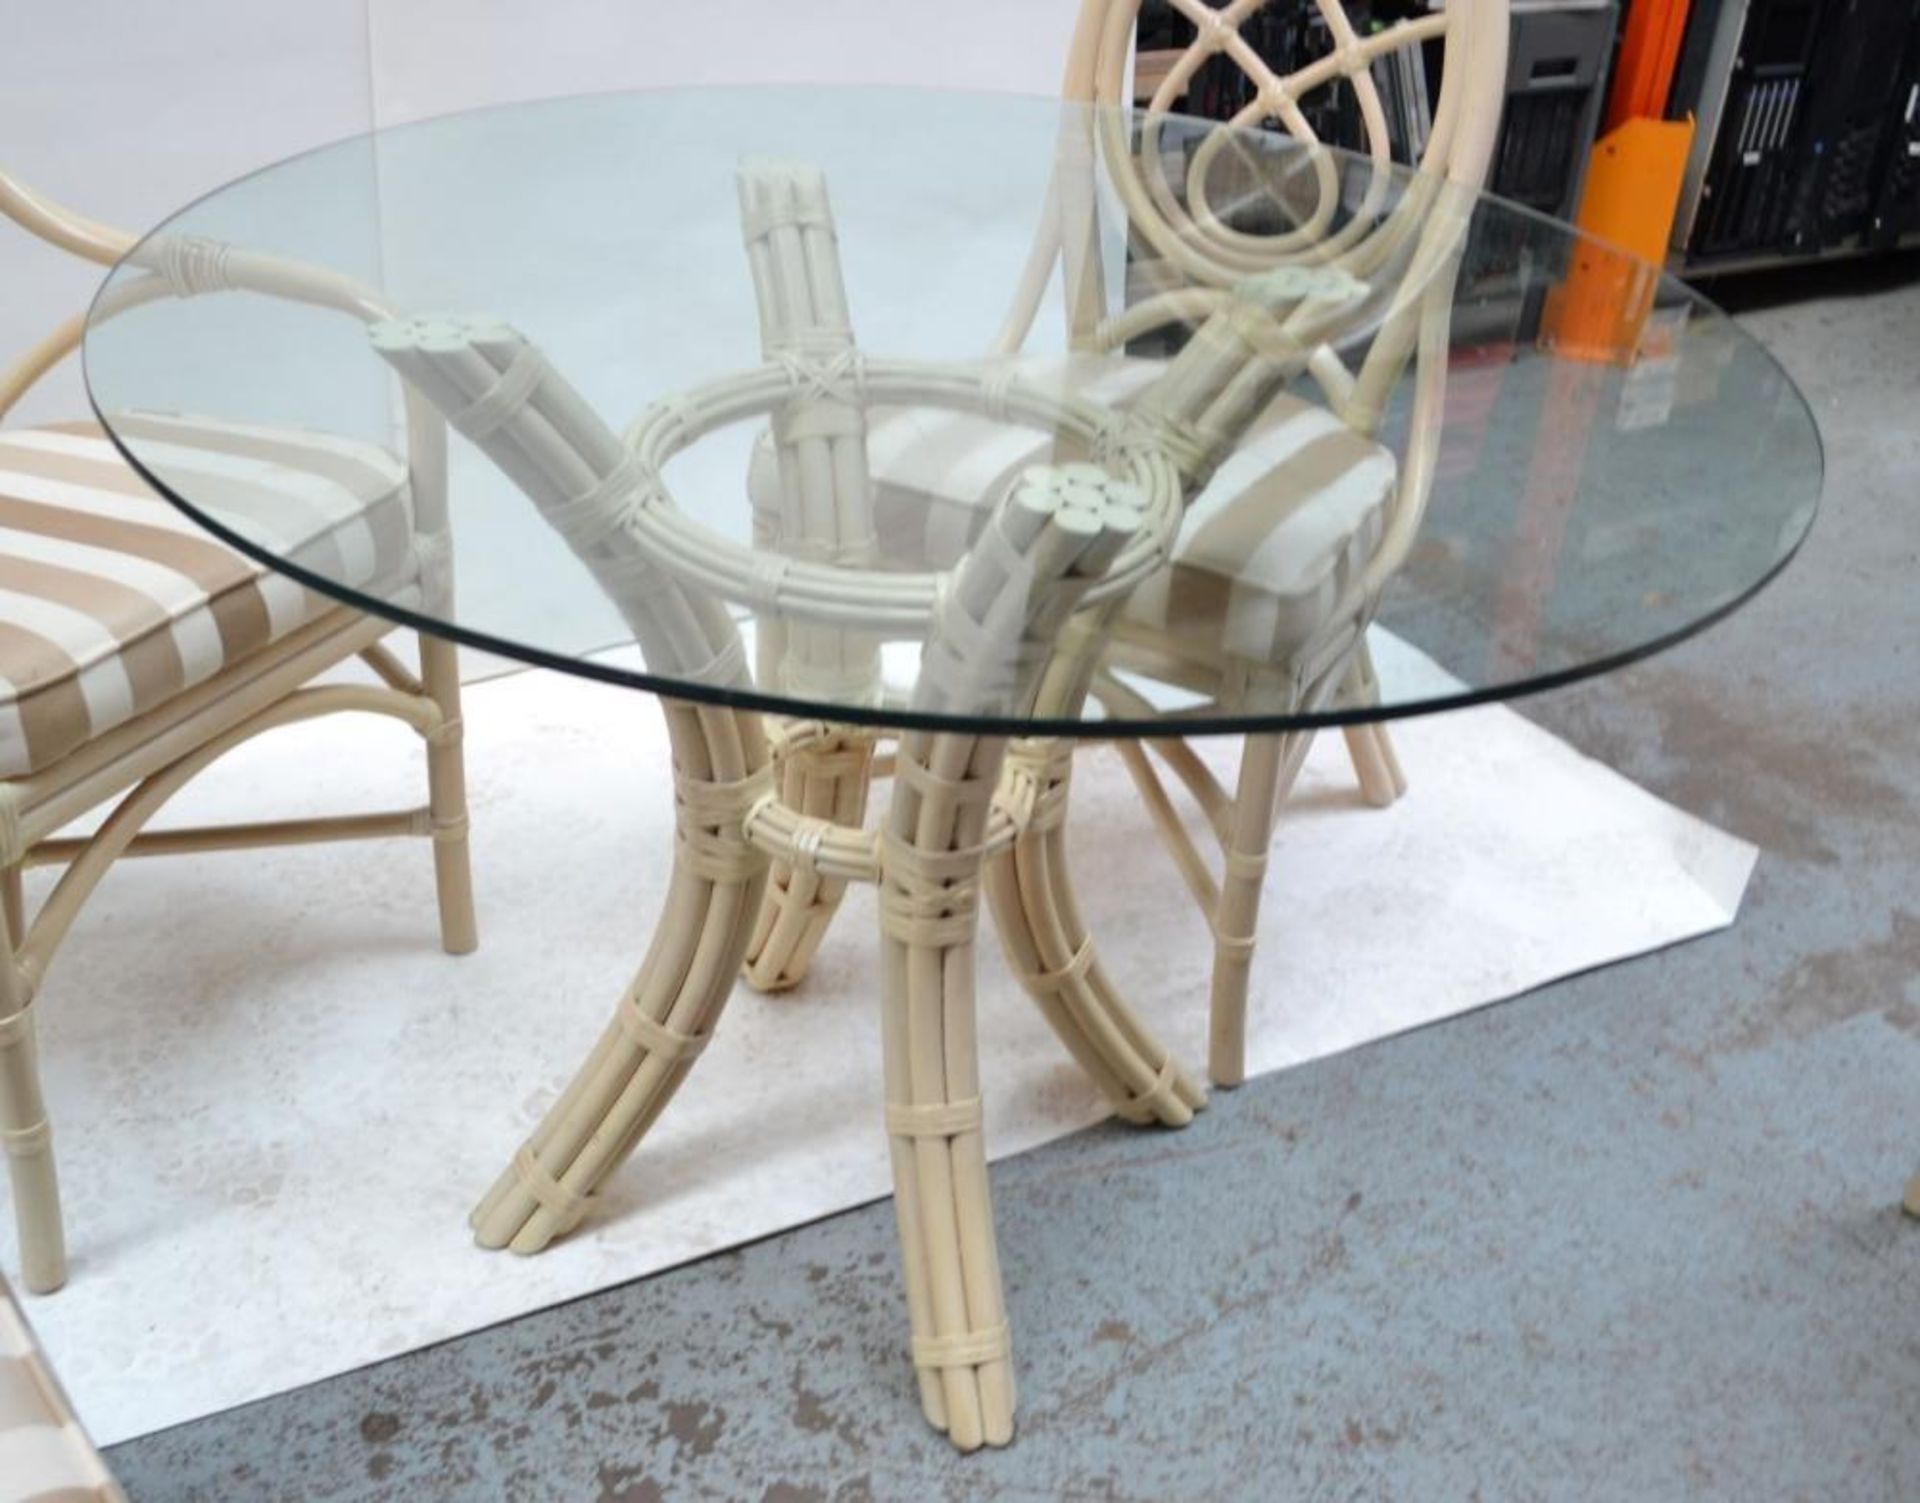 1 x Glass Topped Cane Table with 4 Chairs - Pre-owned In Good Condition - AE010 - CL007 - Location: - Image 11 of 13